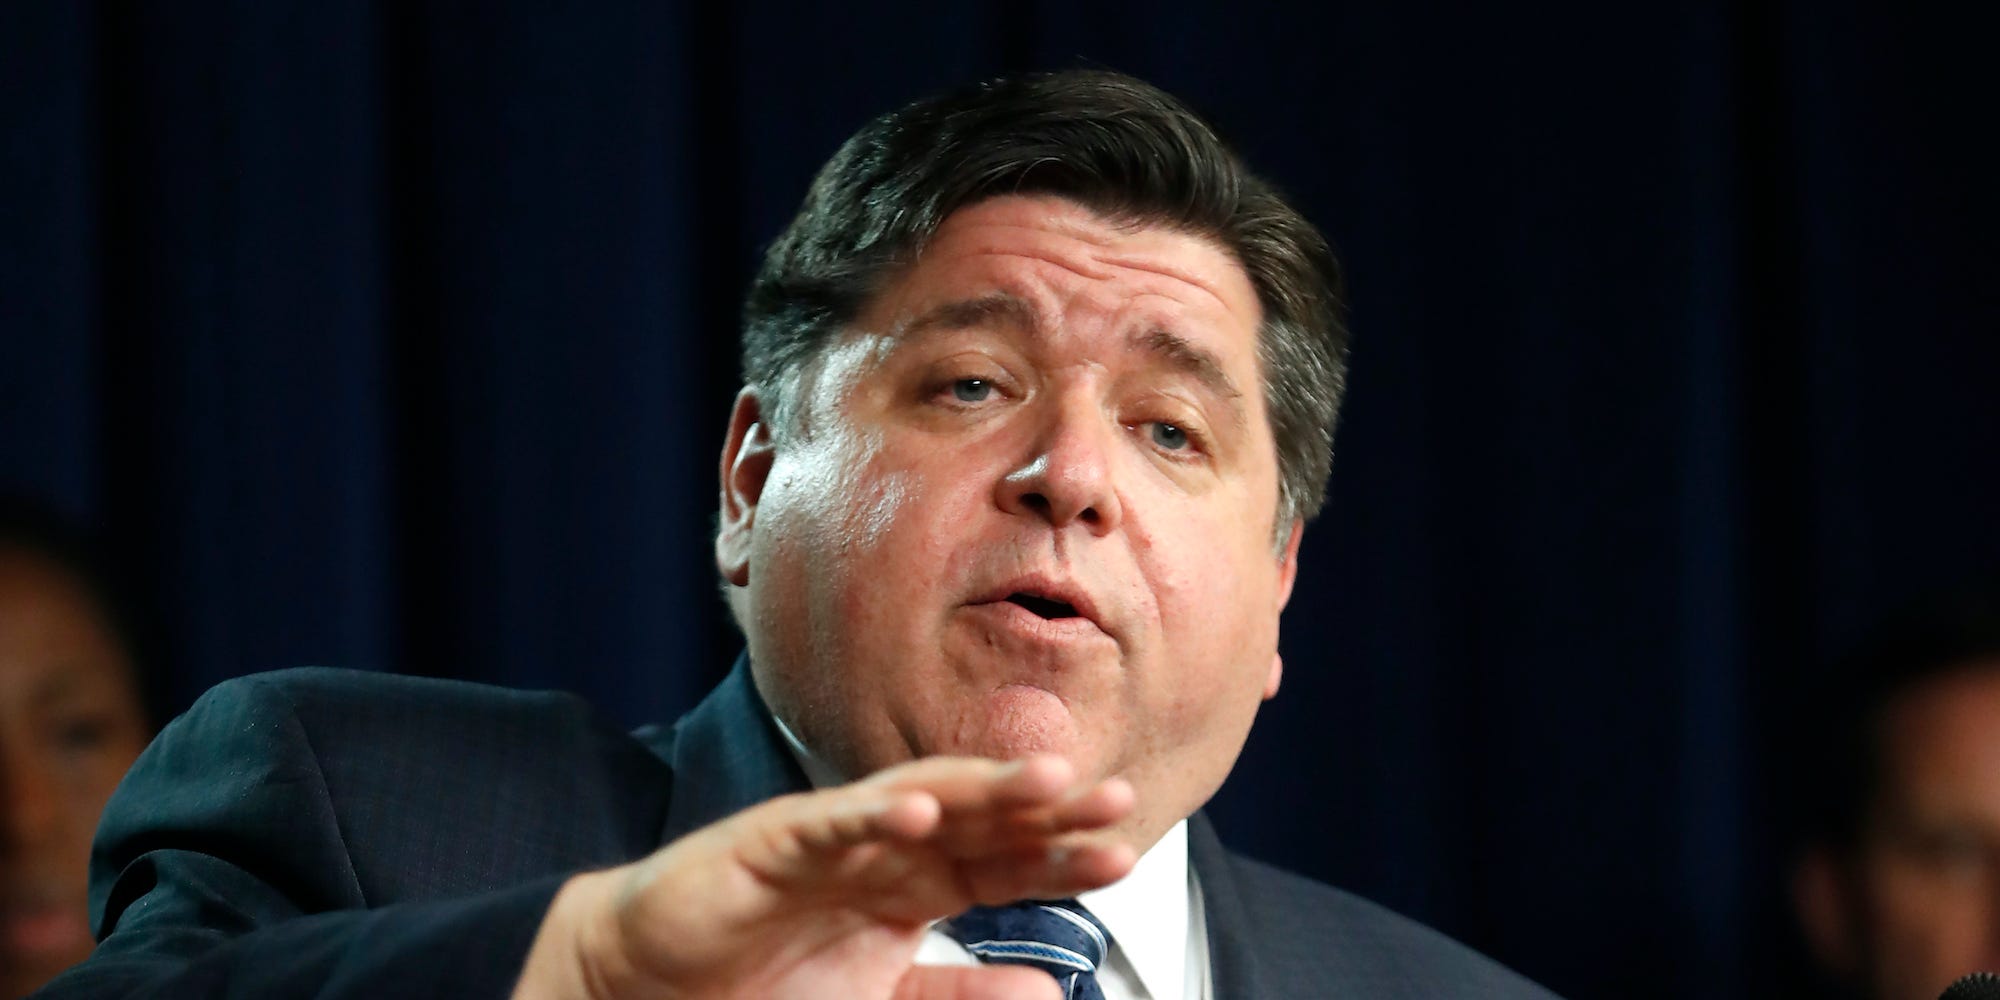 Illinois Gov. J.B. Pritzker responds to a question after announcing that three more people have died in the state from from Covid-19 virus, two Illinois residents and one woman visiting from Florida, during a news conference Thursday, March 19, 2020, in Chicago.